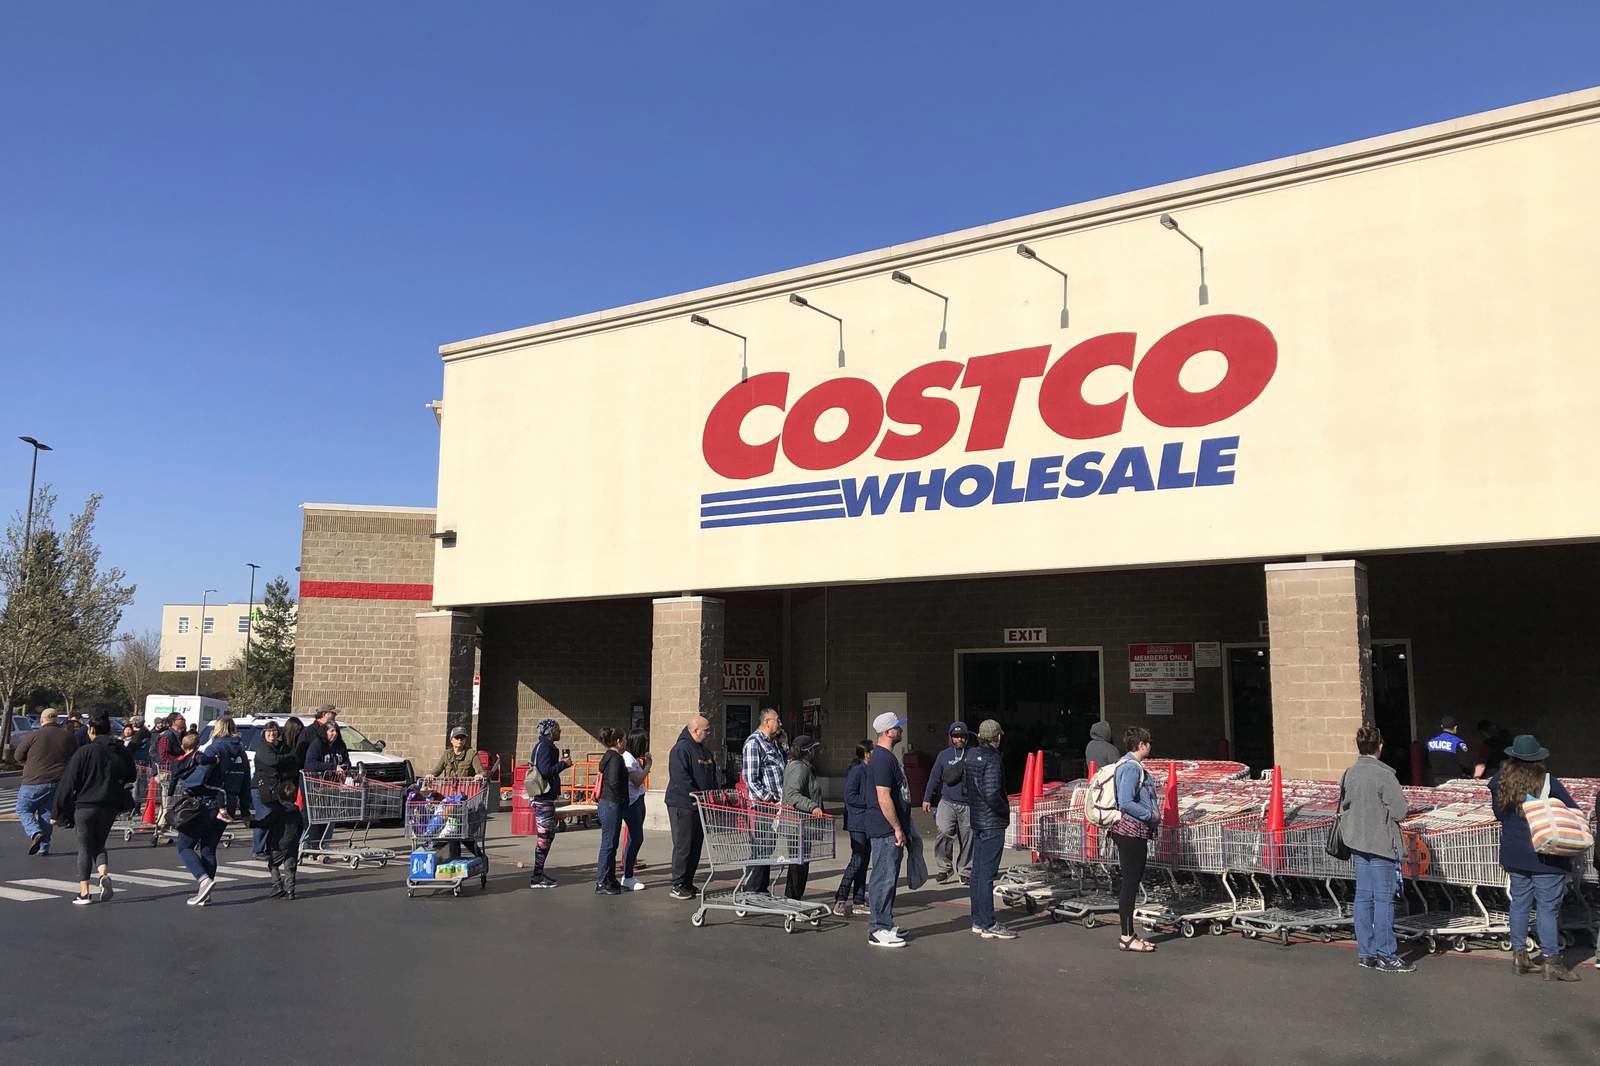 Scam alert: That Costco text message isn’t really from them